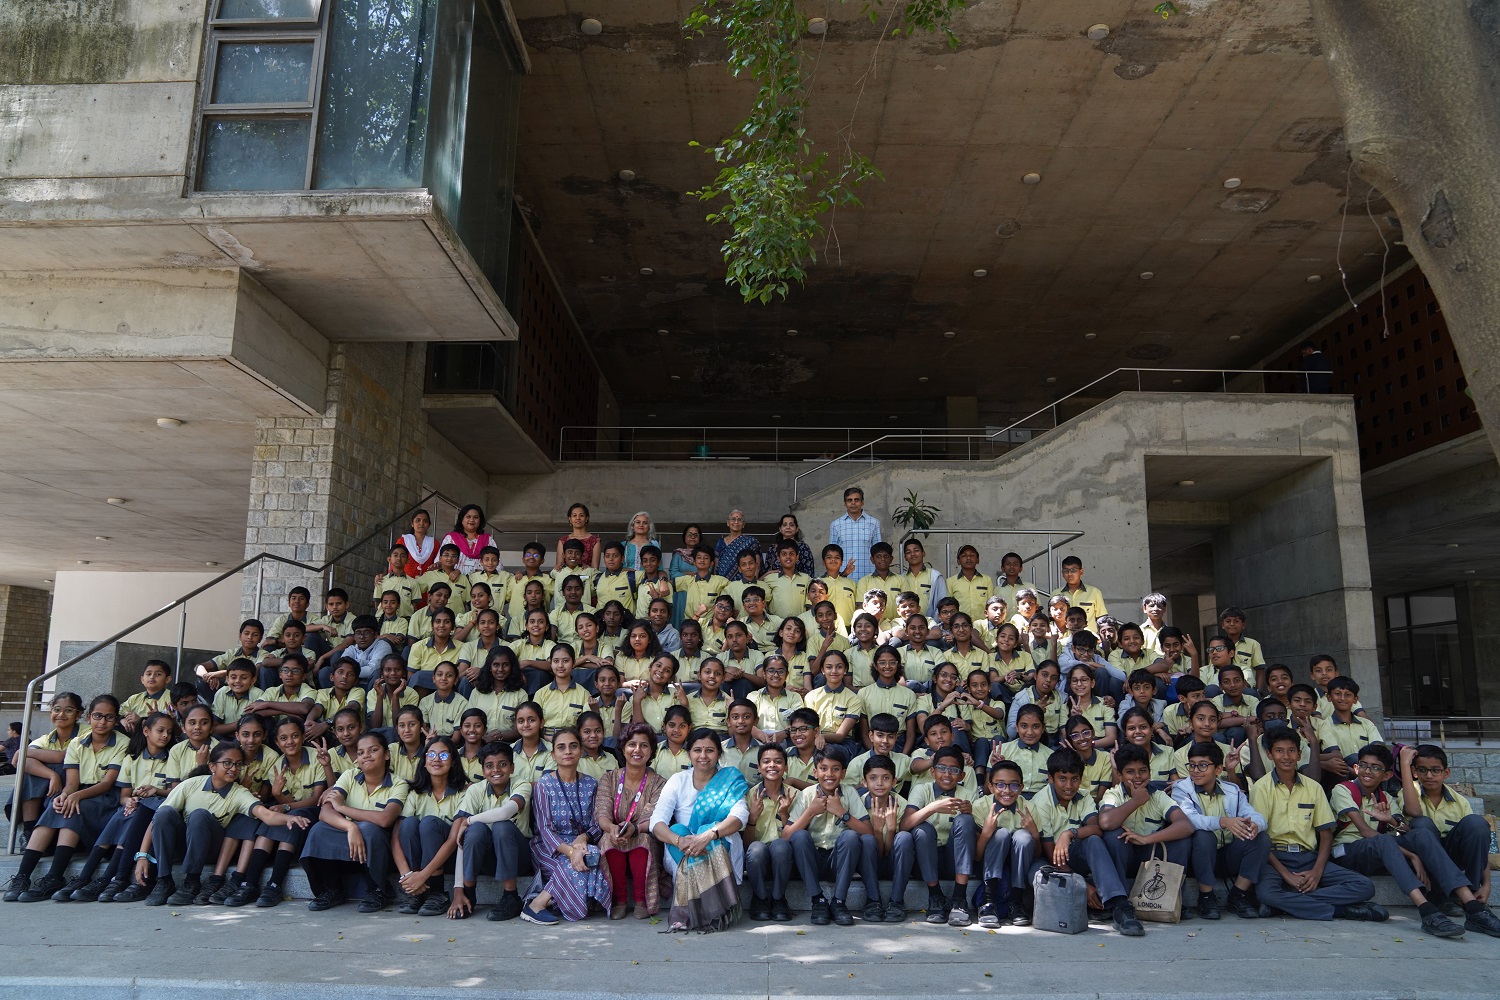 Students of Grade 6 in Samhita Academy visited the IIMB campus on 16th February 2024. They participated in a Sustainability competition, conducted by Prof. Haritha Saranga, Chairperson of the Sustainability Task Force at IIMB. Prof. U Dinesh Kumar, Dean, Faculty, IIMB, distributed the certificates to the winners.